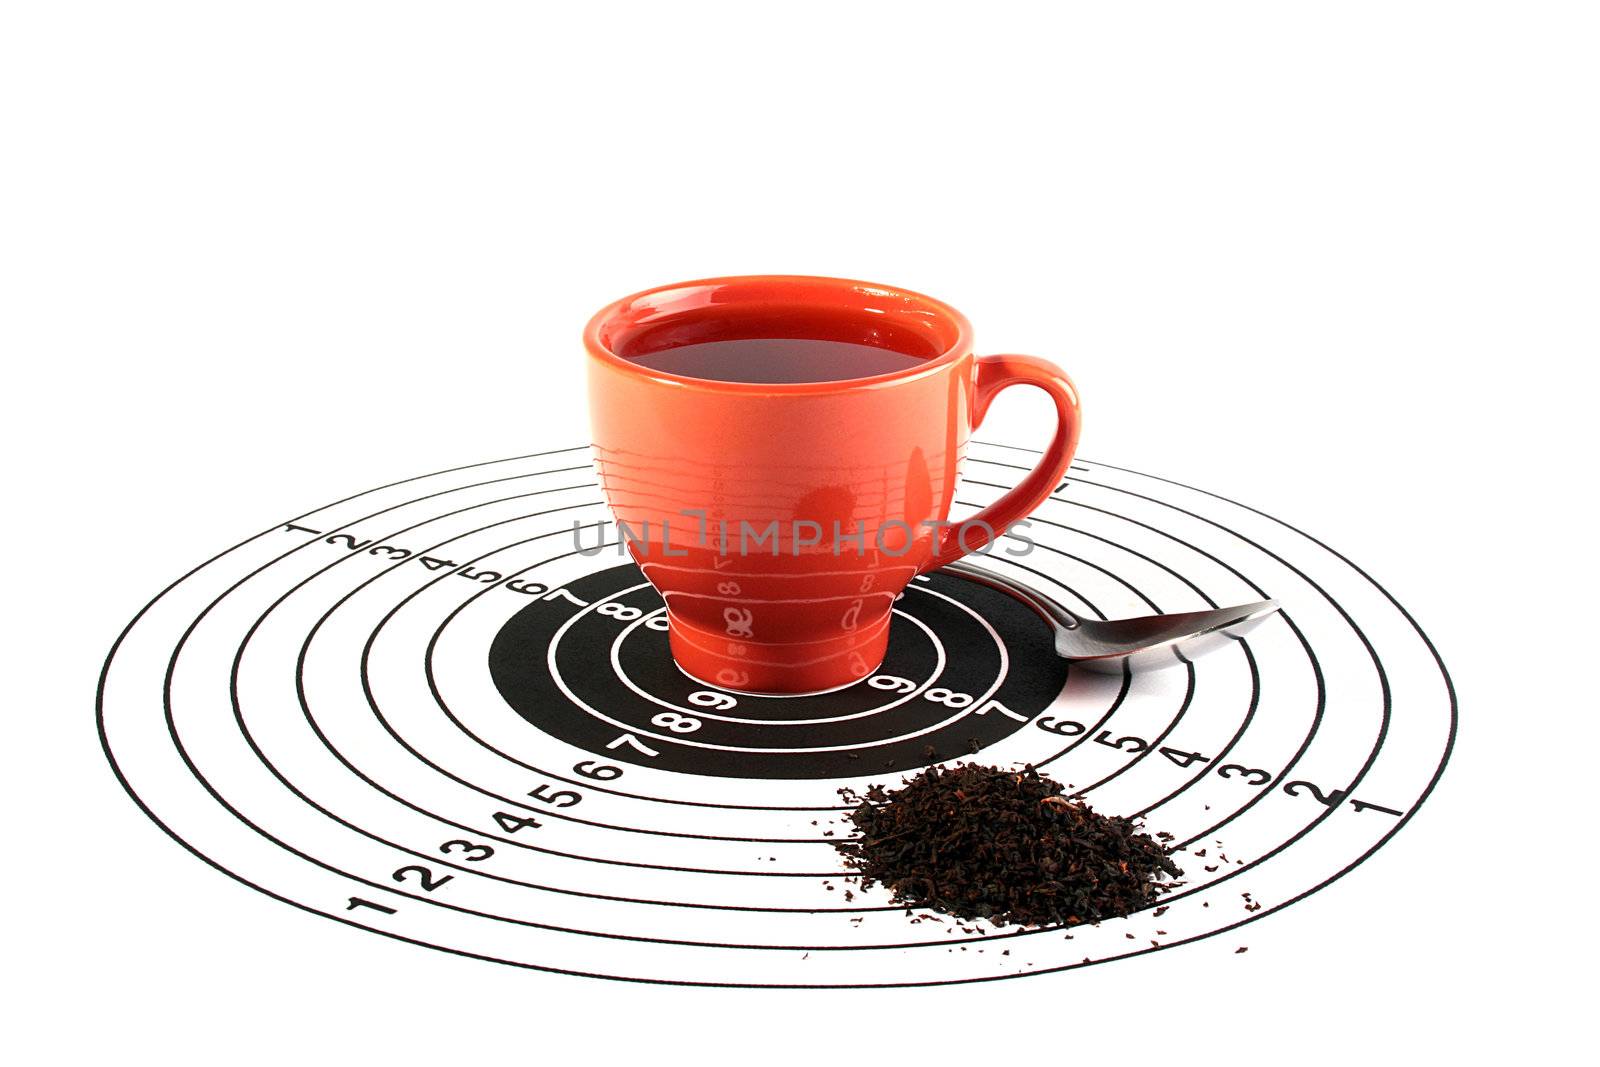 Tea is your choice by VIPDesignUSA